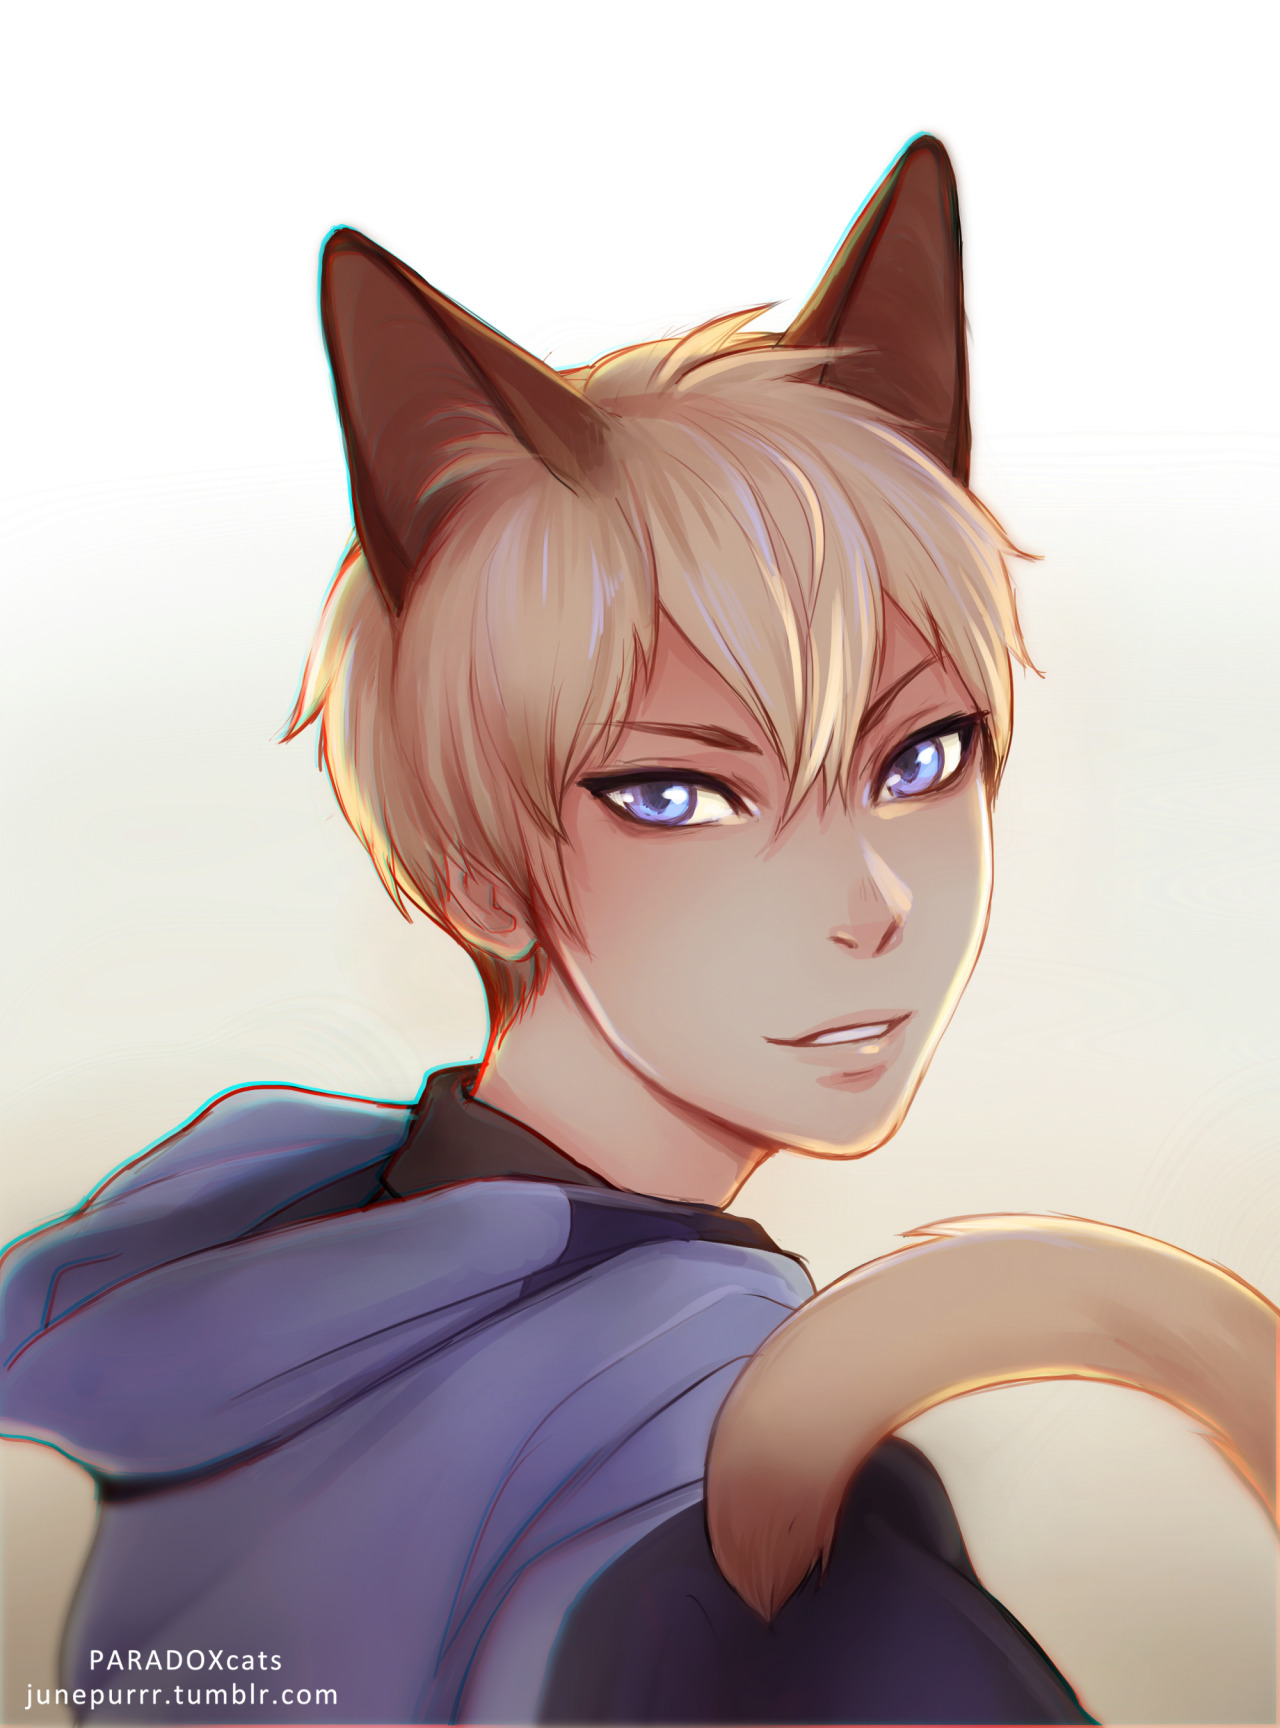 Material Weakness Siamese Catboy